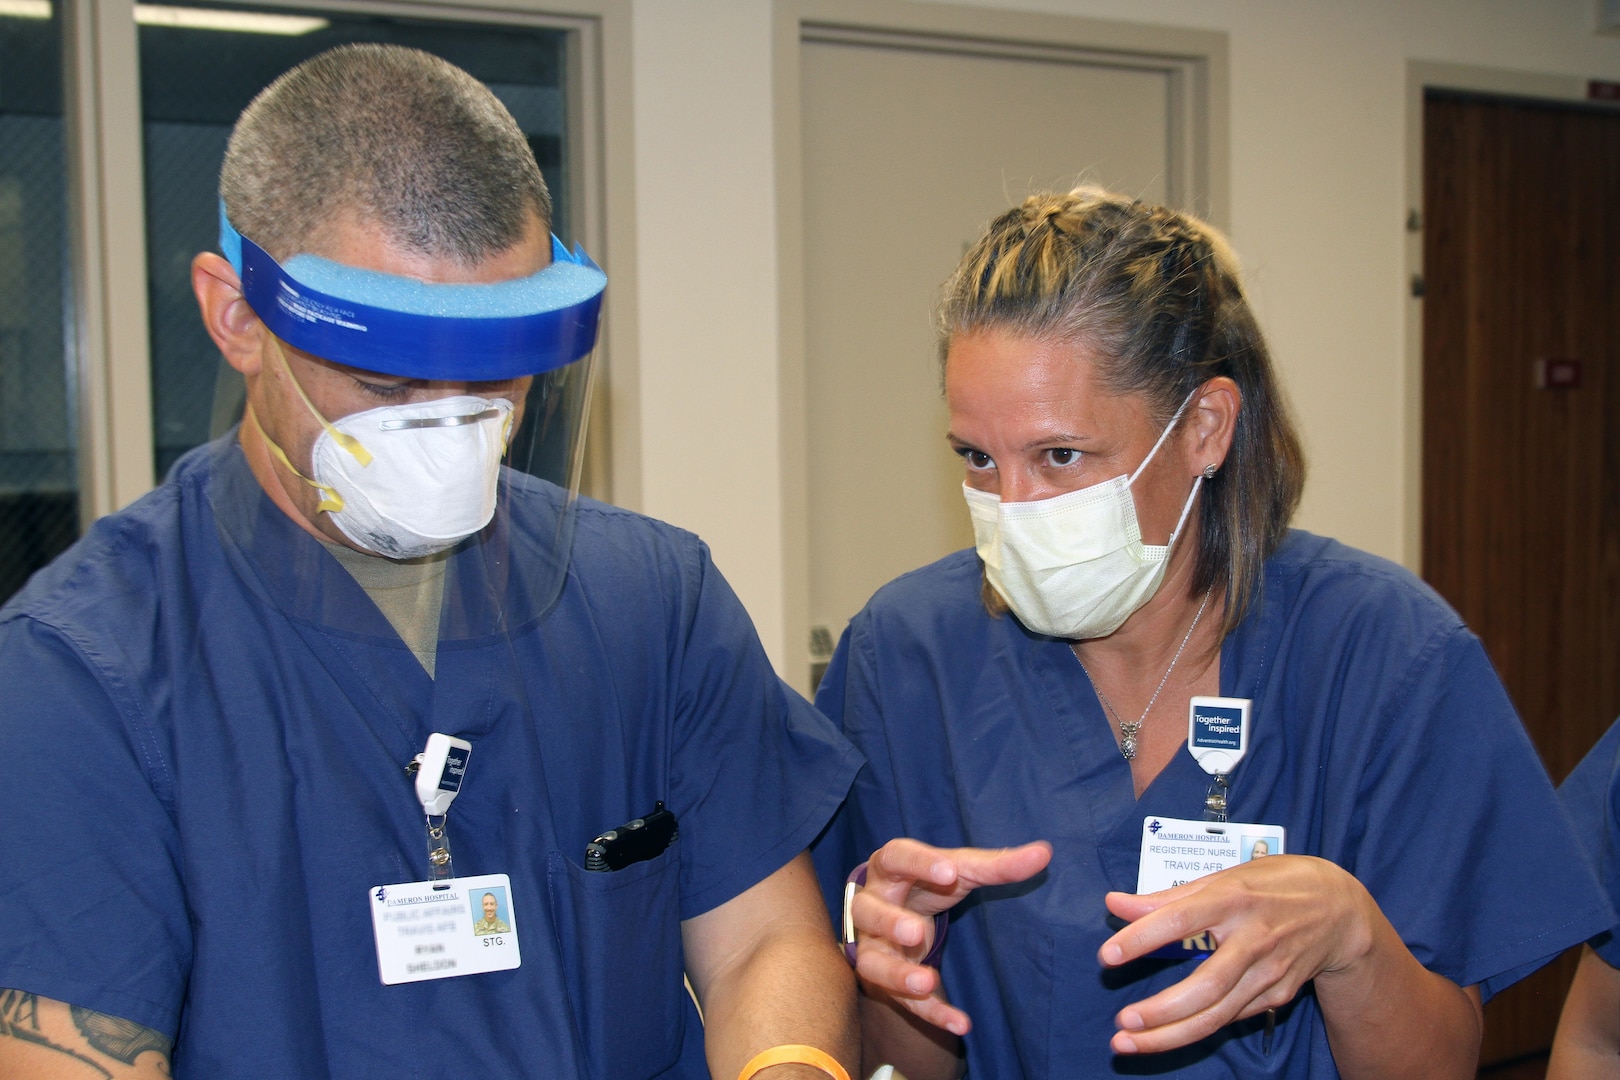 Image of U.S. Air Force Capt. Ashley Ritchey instructing Staff Sgt. Ryan Sheldon of the California Army National Guard on proper application of medical personal protective gear.